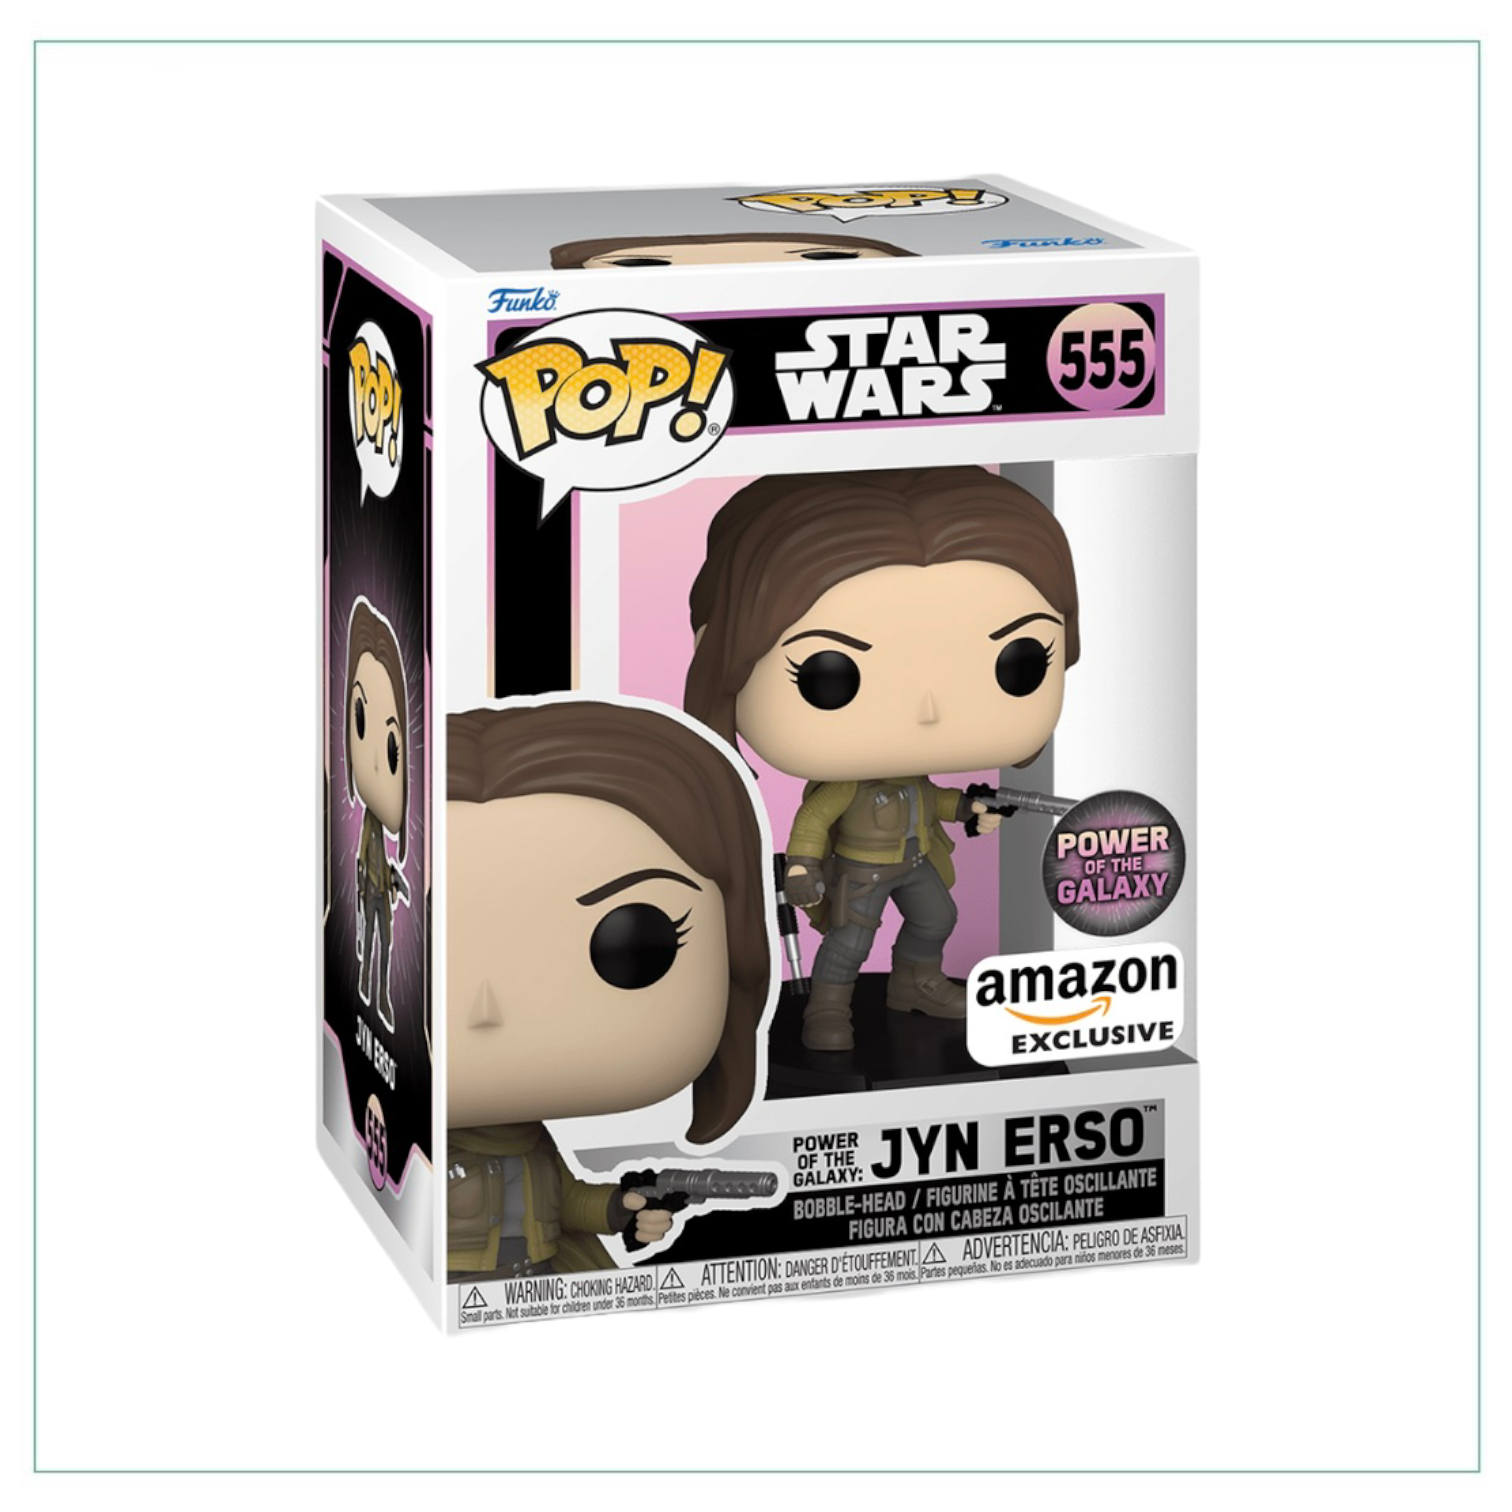 Jyn Erso #555 Funko Pop! Power of the Galaxy Star Wars - Amazon Exclusive - Angry Cat